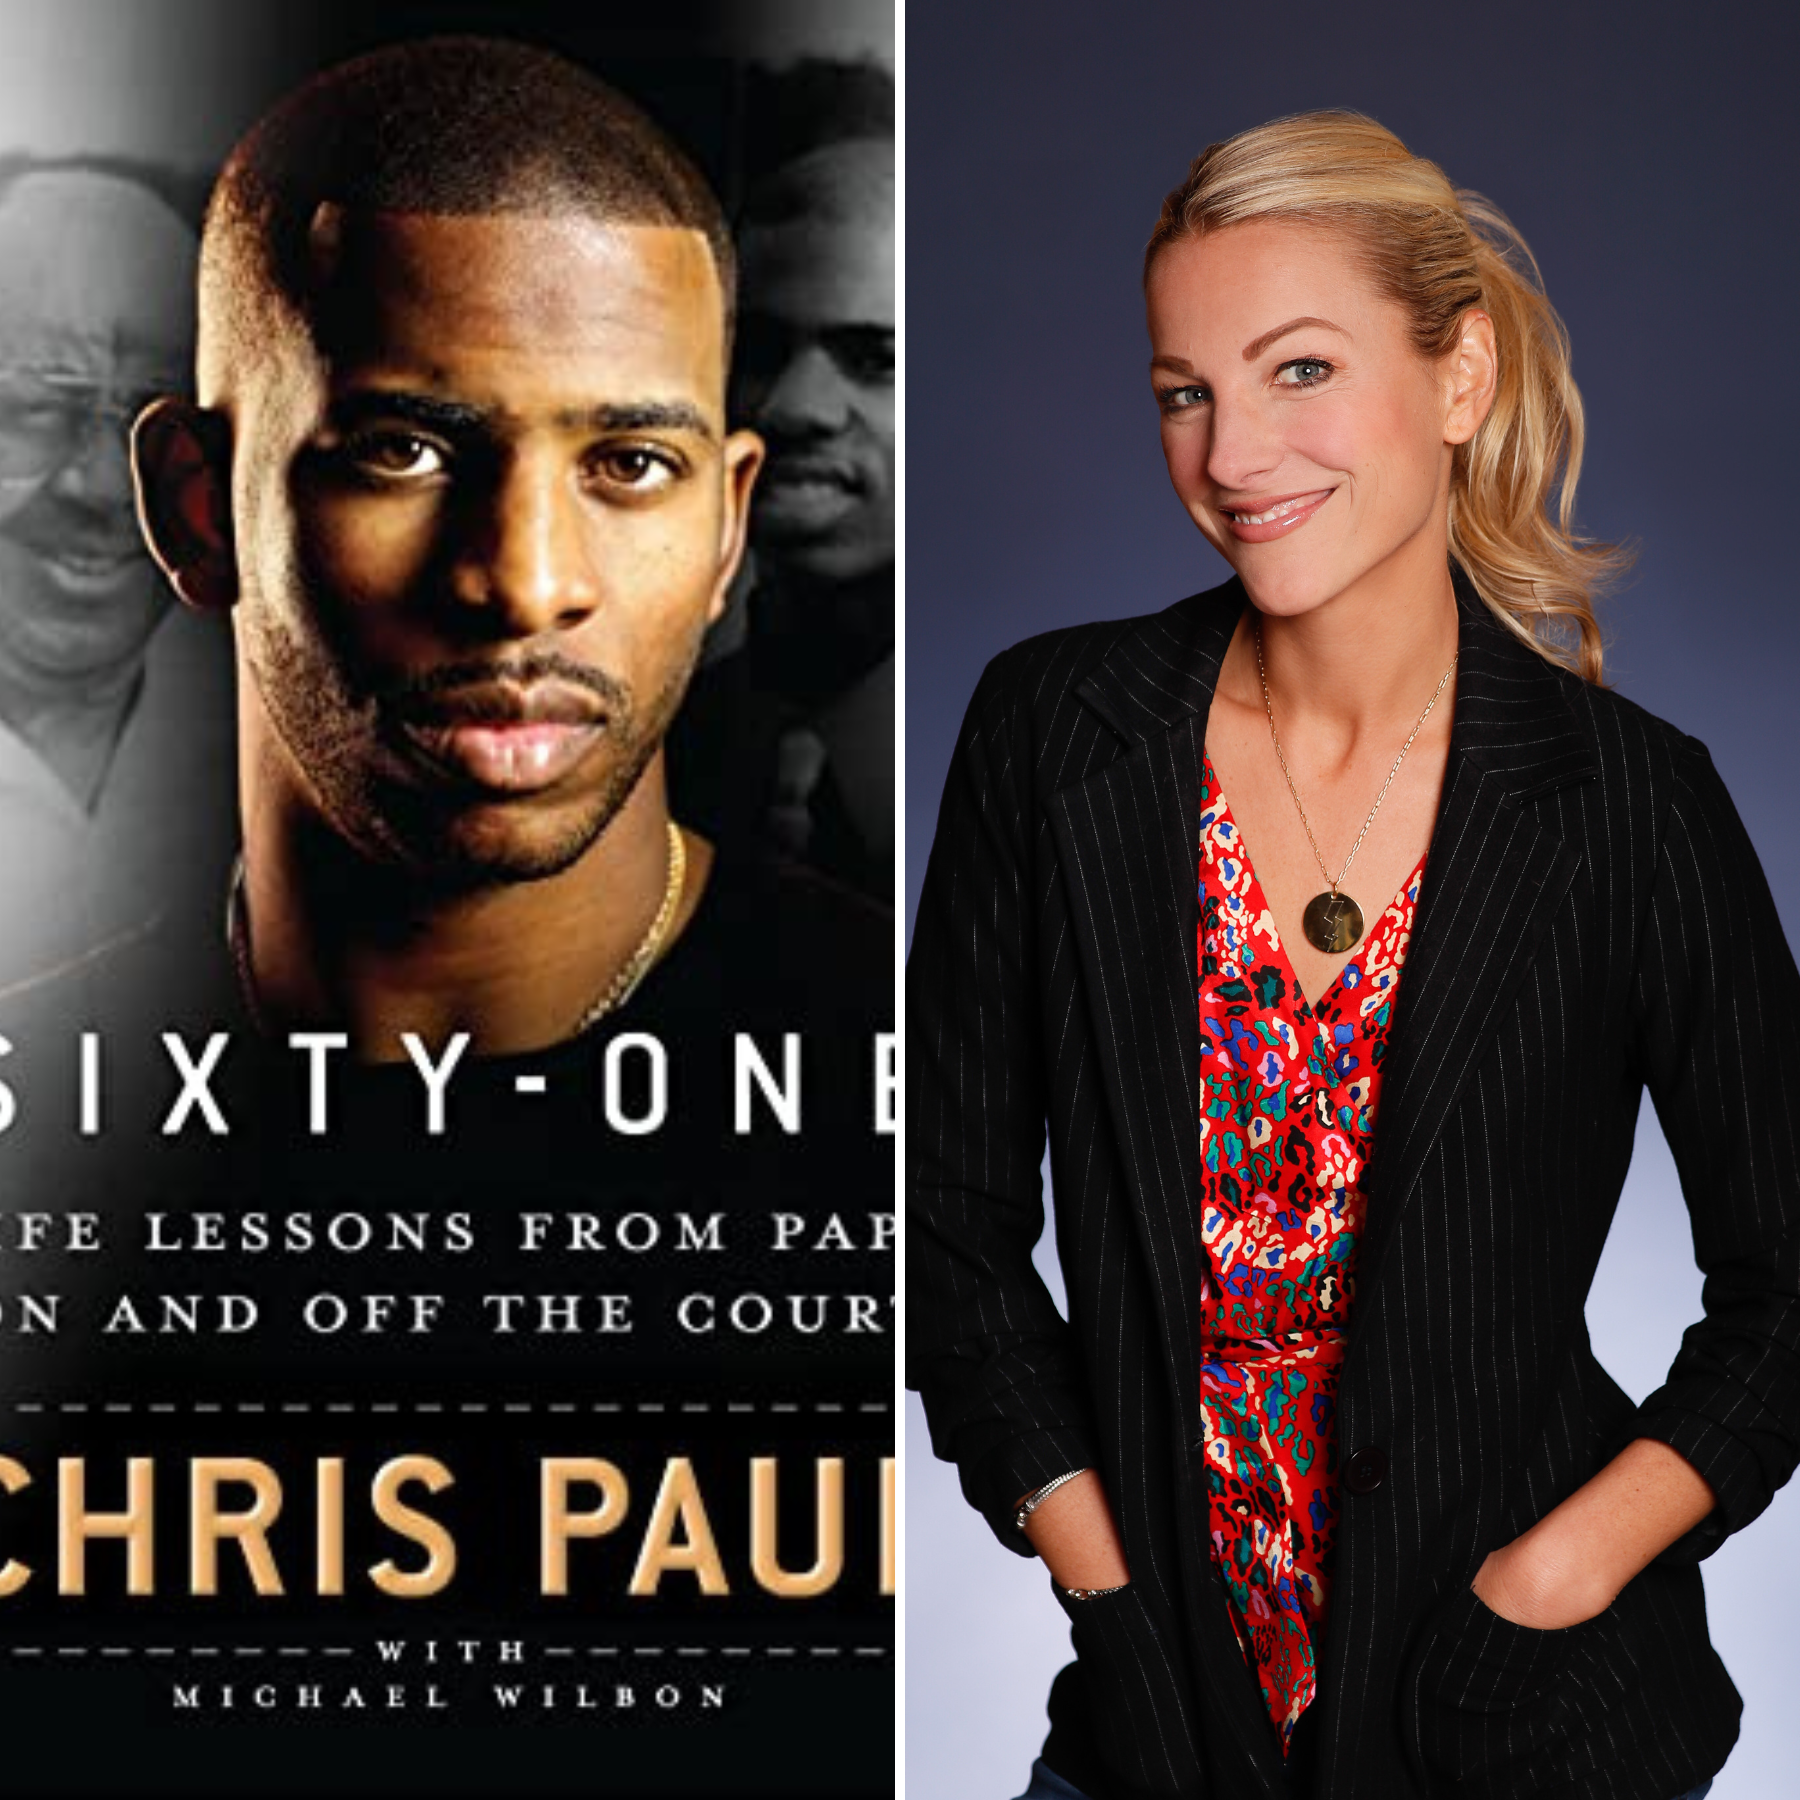 Split image of the book cover for Chris Paul's new memoir, Sixty-One, and sports journalist Lindsay Czarniak.